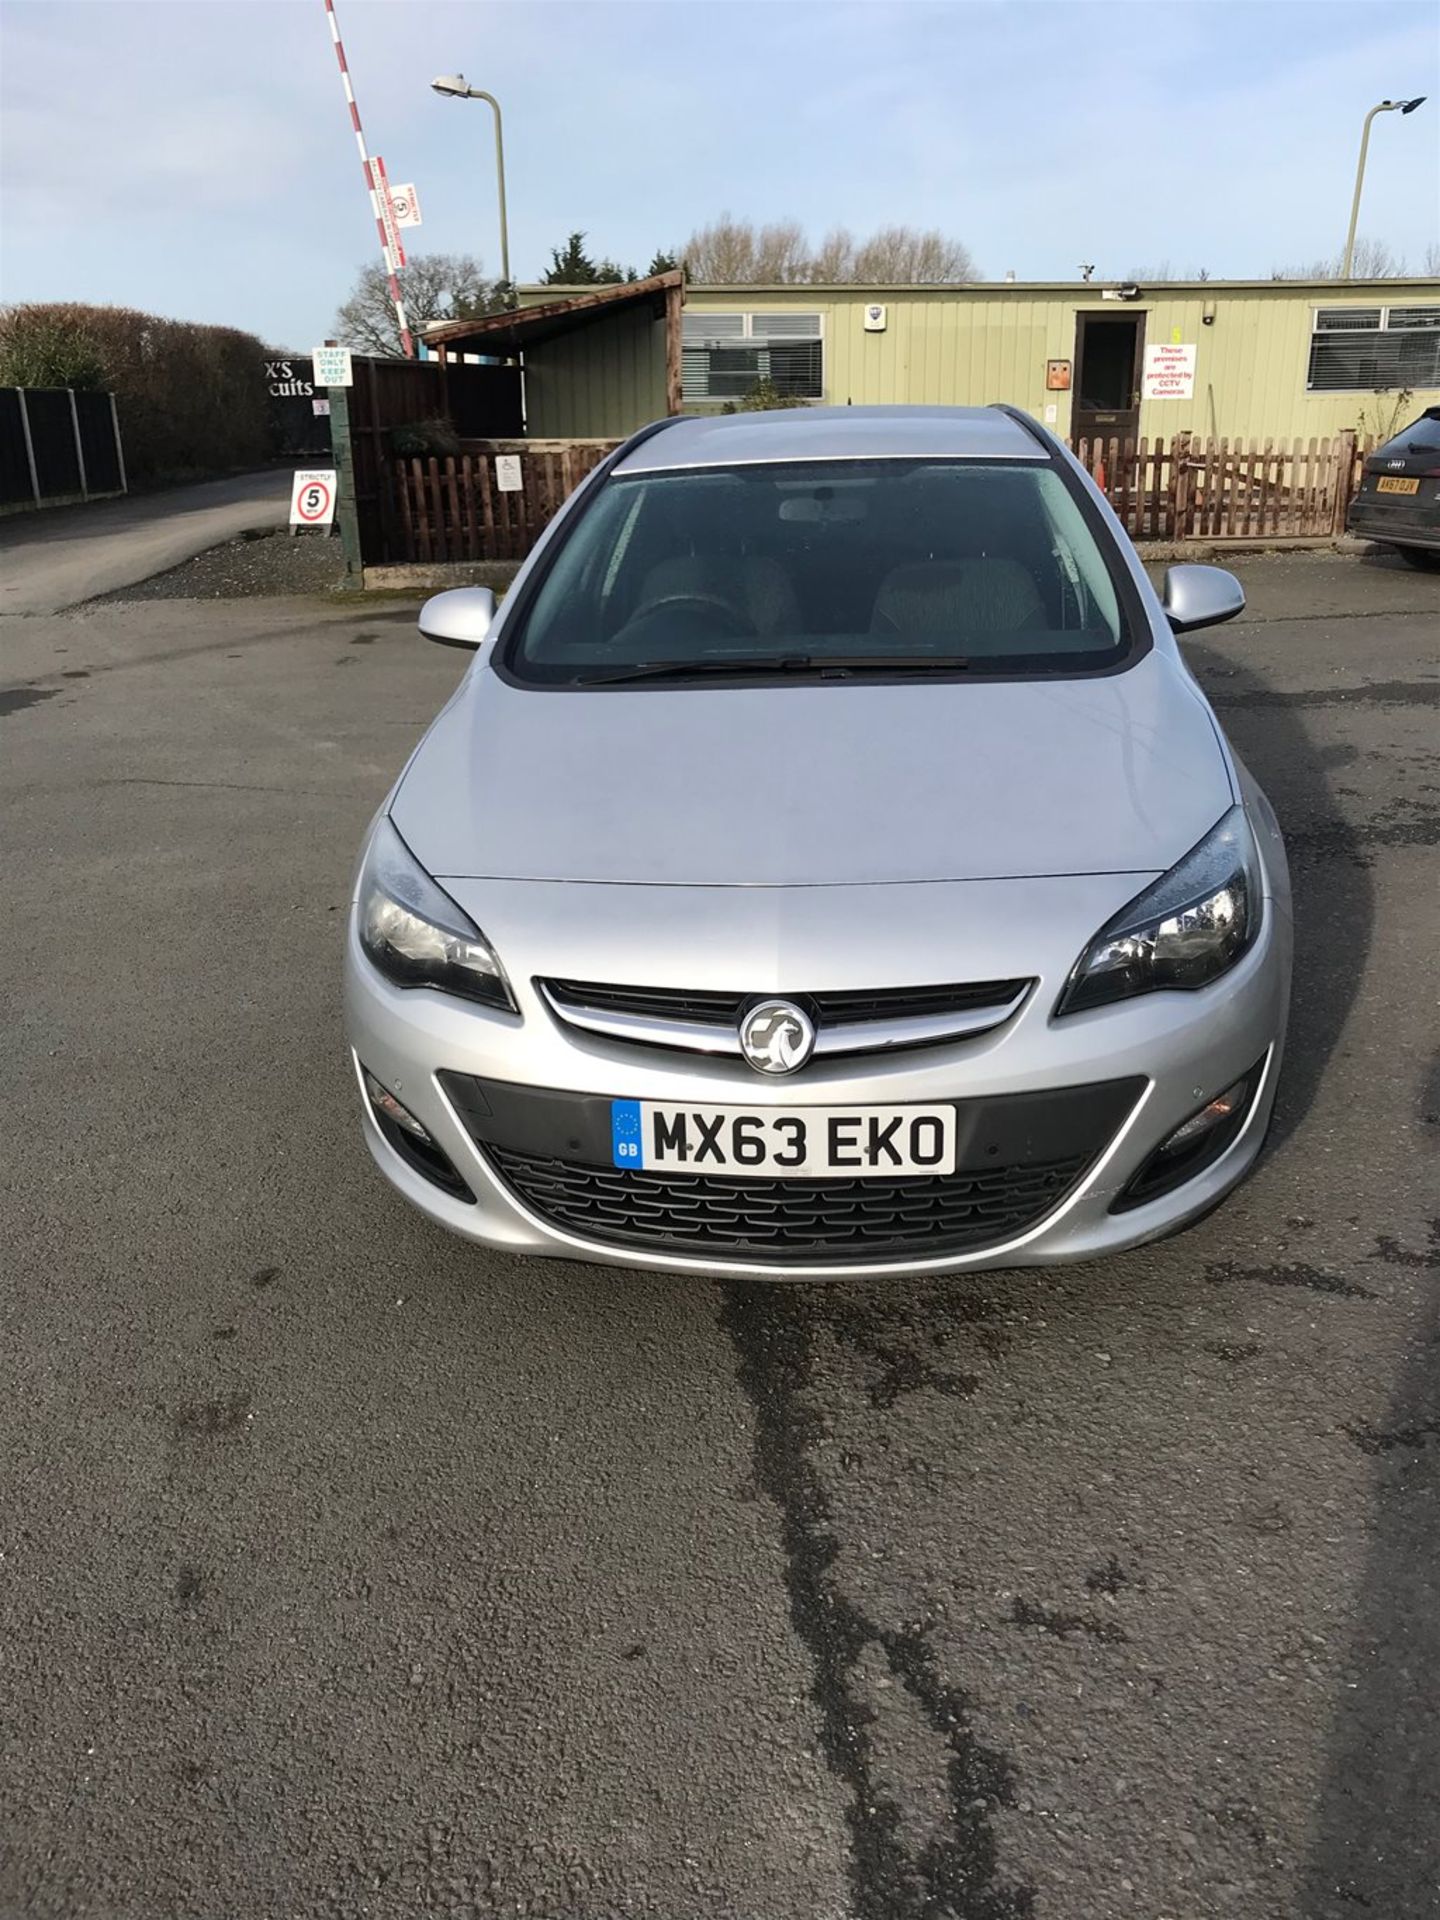 Vauxhall Astra 1.7 CDTi Exclusiv 110ps Estate Air Con - Image 2 of 8